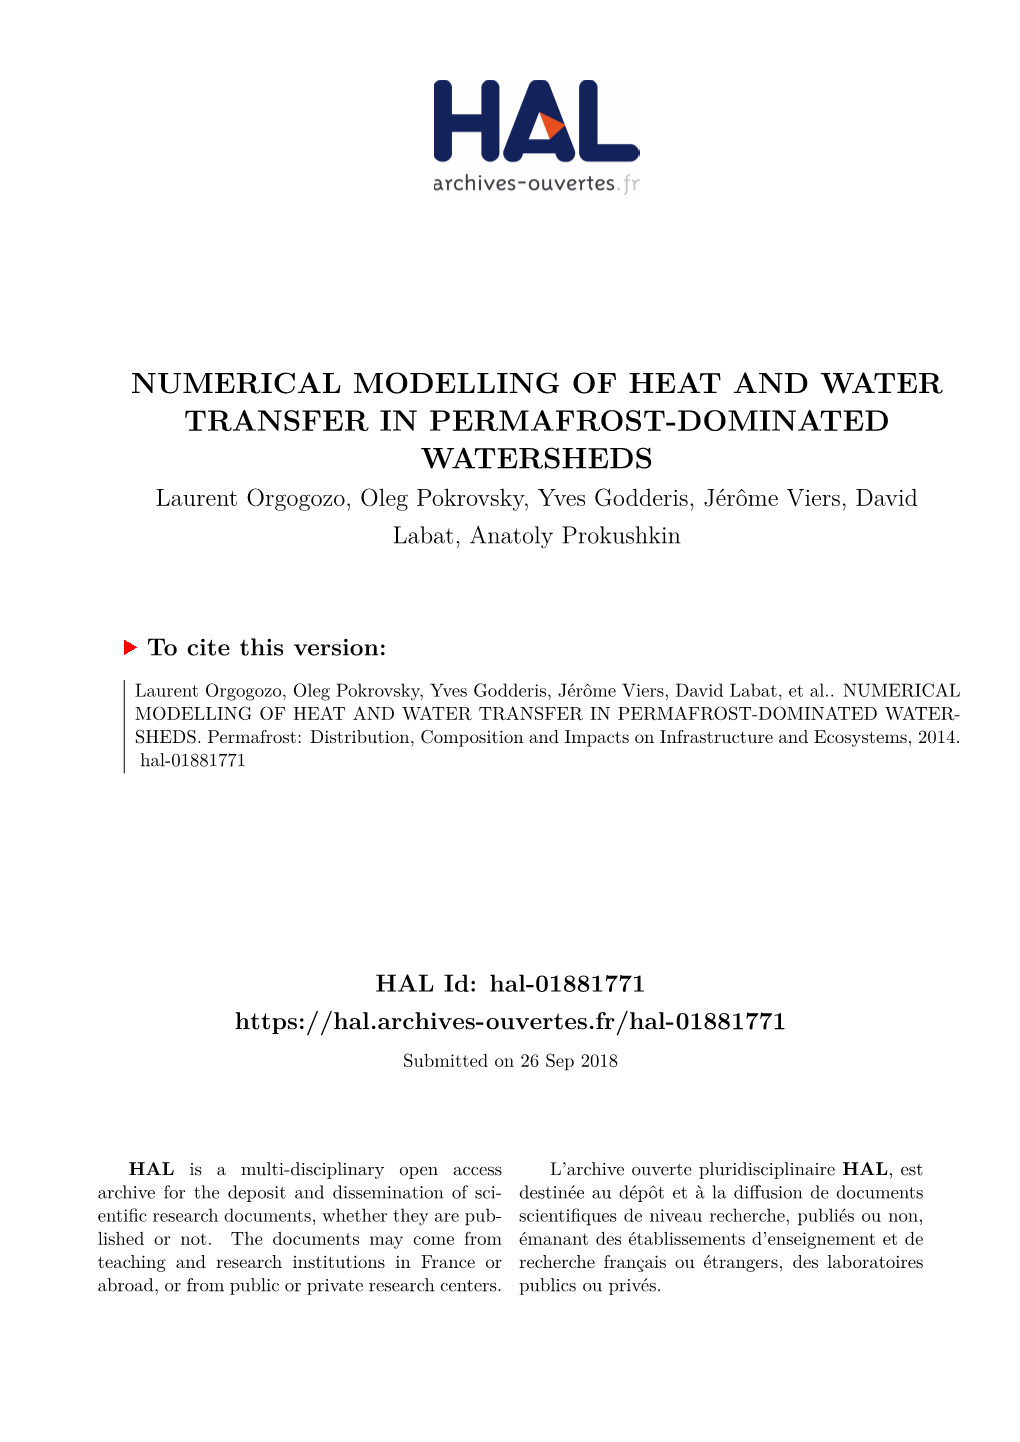 Numerical Modelling of Heat and Water Transfer In